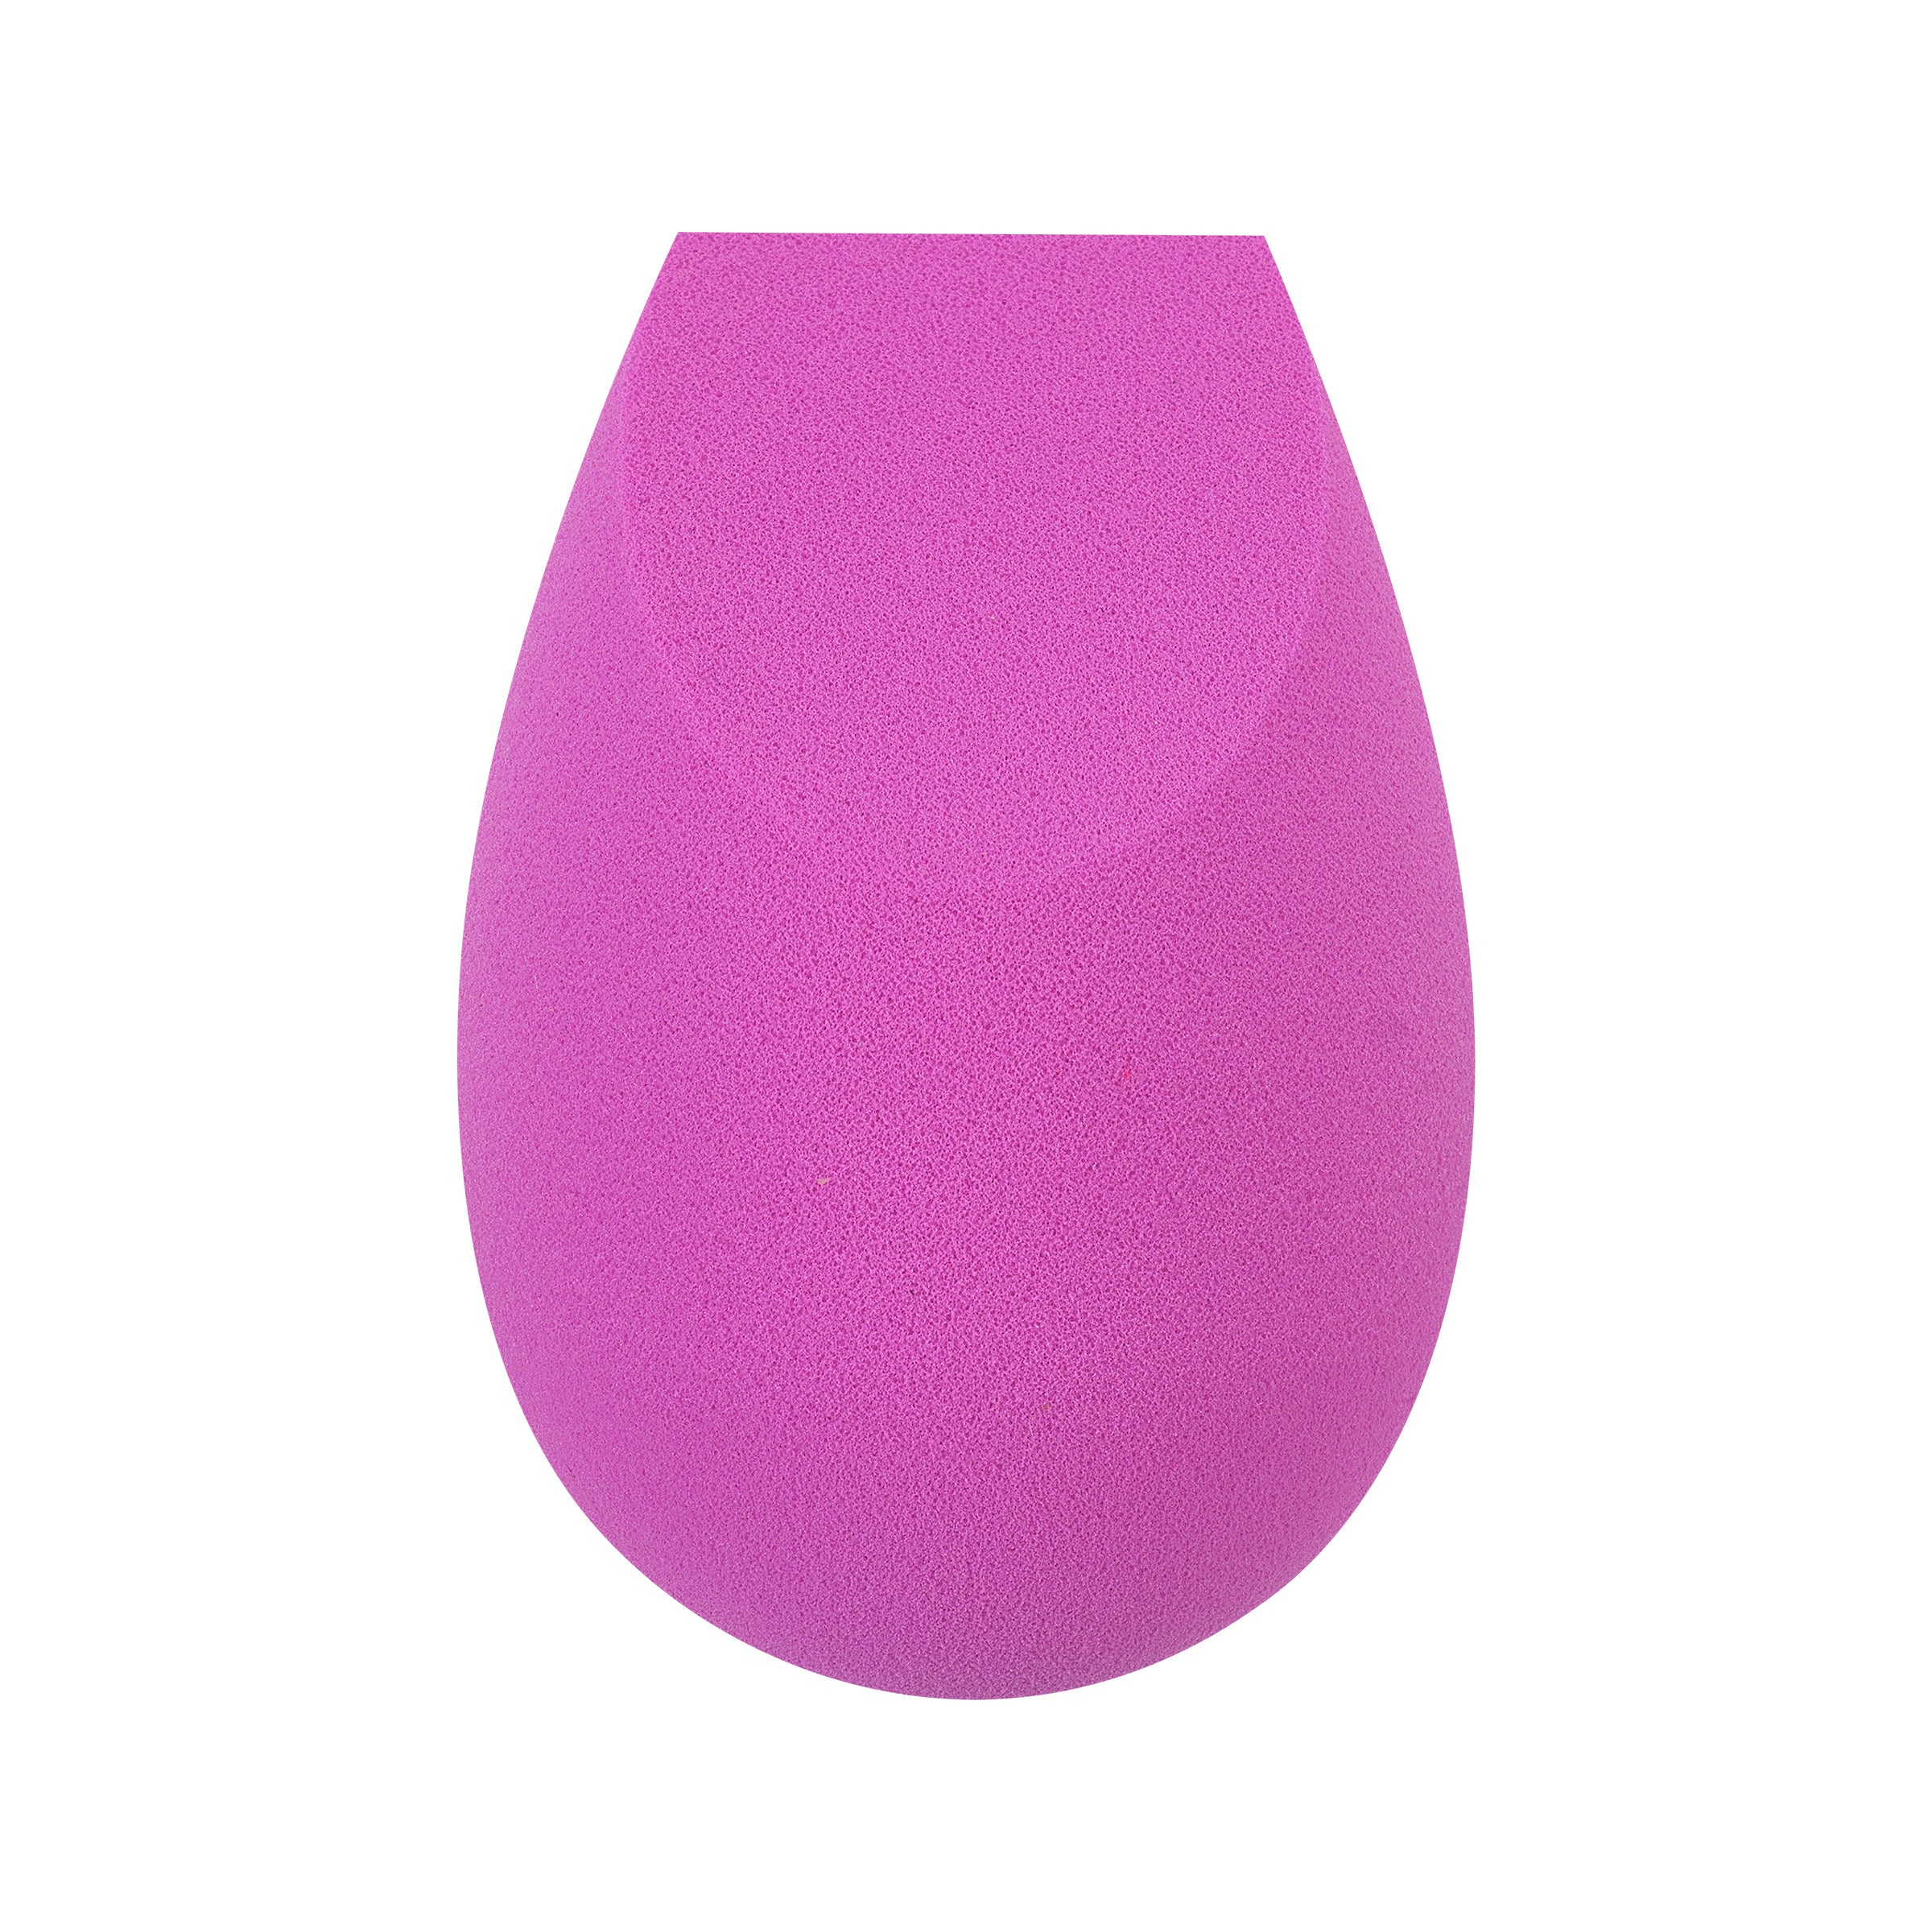 How Often Should You Replace Your Beauty Blender?